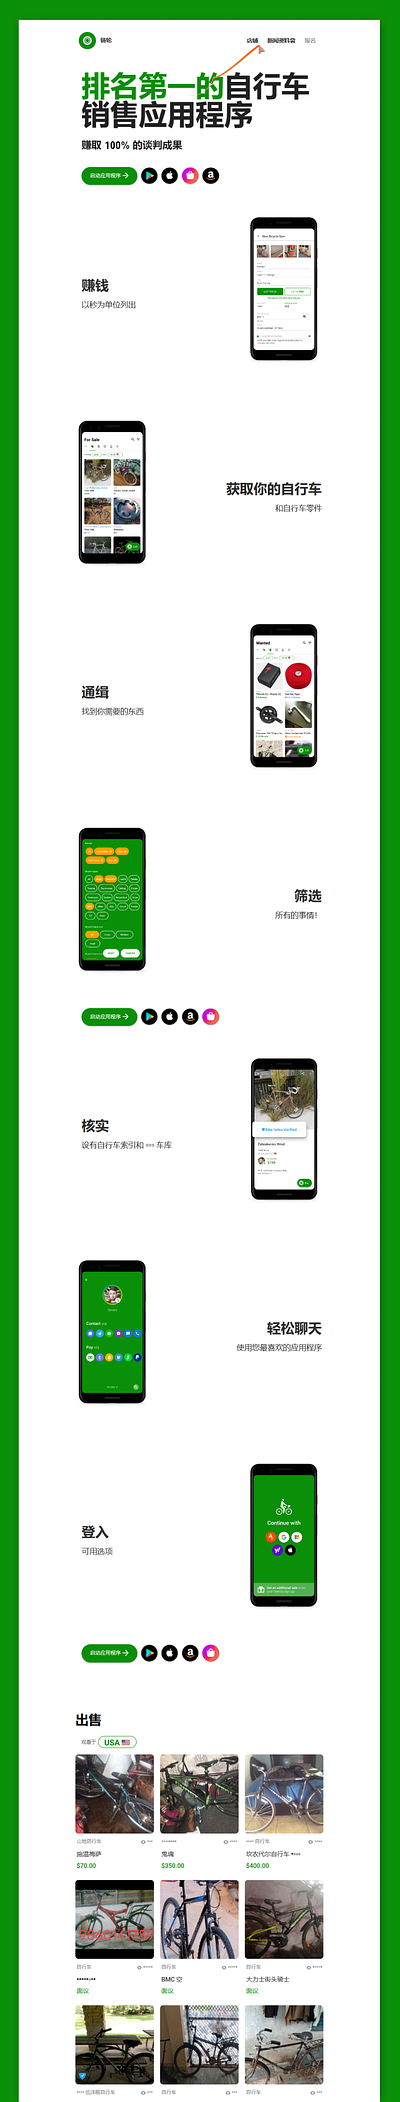 Sprocket Web /app Page with UIX Improvements in Chinese android apple aquisition bicycle bike brand chinese conversion cta cycle experimentation landing mandarin marketing page sprocket ui ux web website